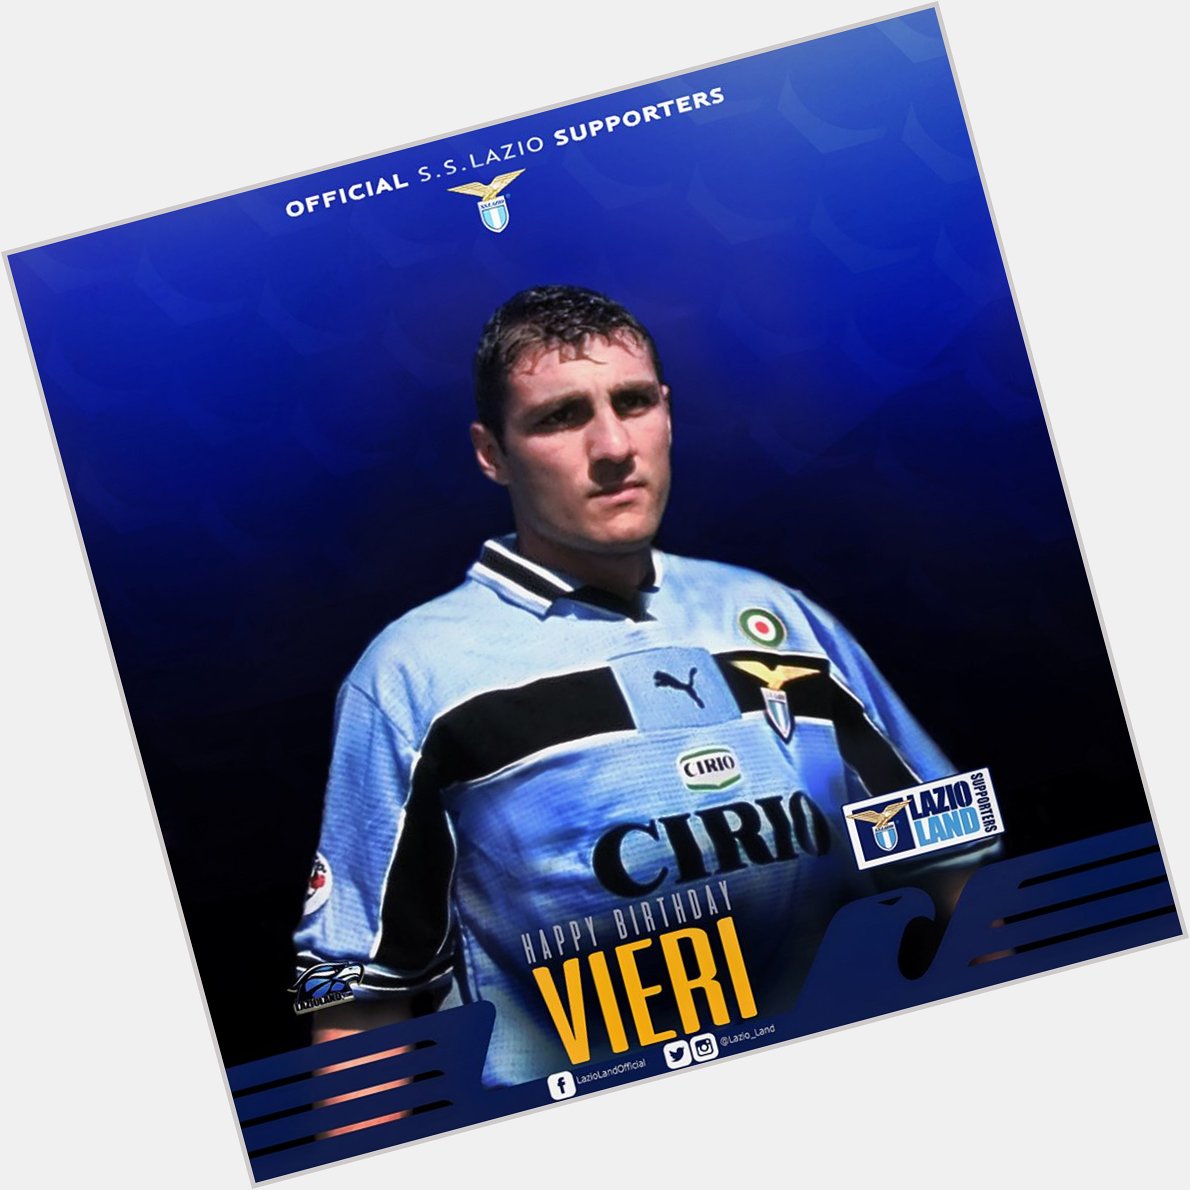 Happy Birthday to the player formerly known as \Bomber\ and the DJ presently known as \Bobo\ - Christian Vieri! 